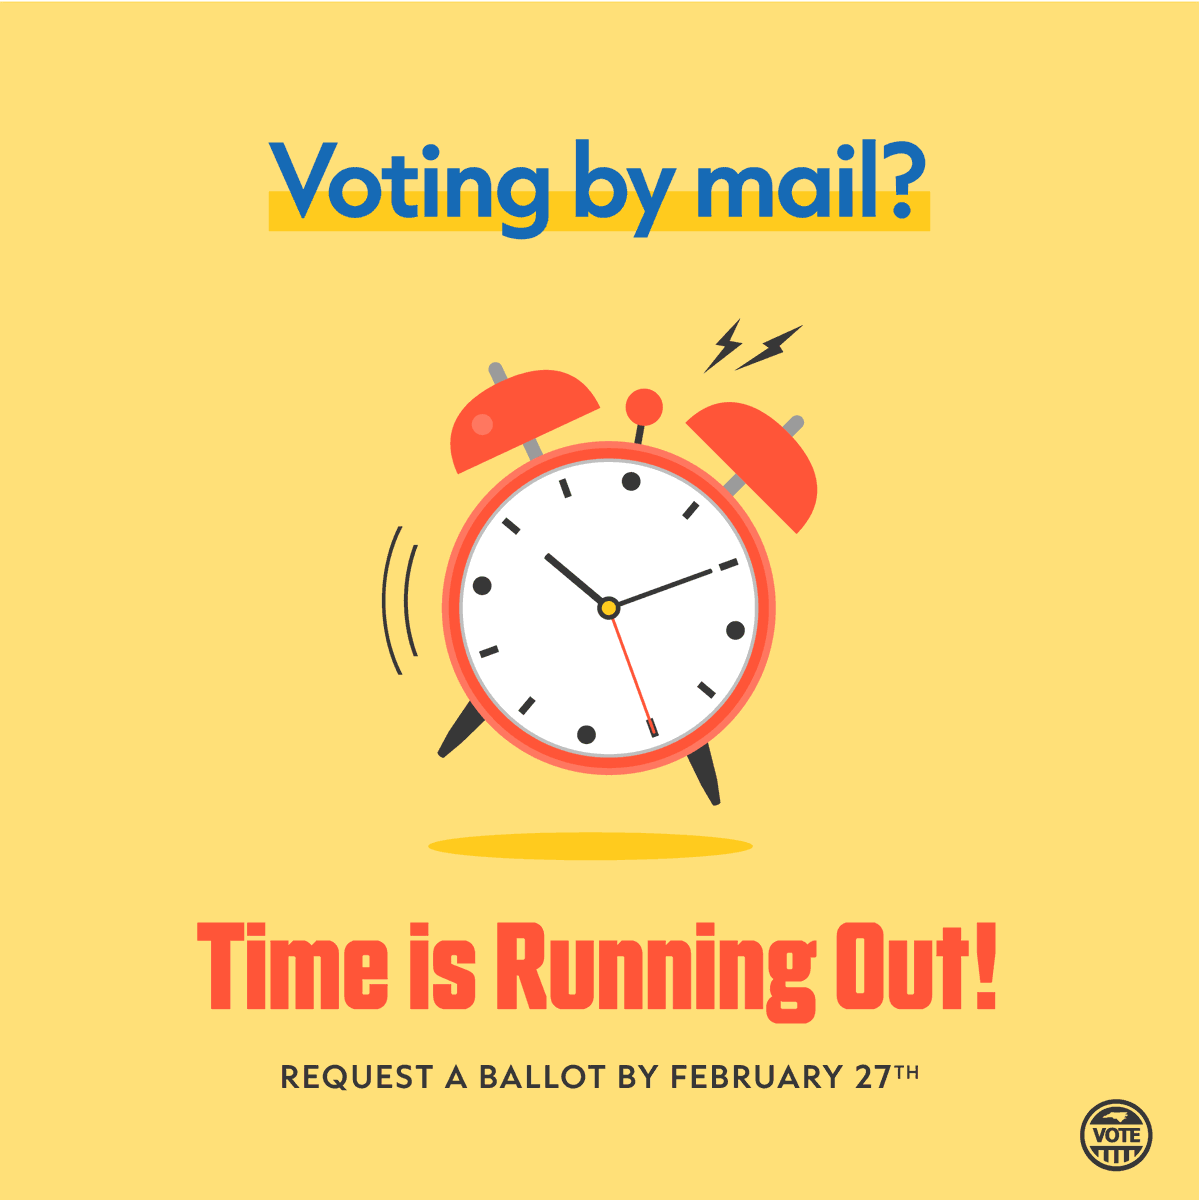 ⏰Time is running out! If you would like to vote by mail, you can request a ballot for the 2024 Primary Election through Feb. 27 here: bit.ly/4224yuk #NCpol #YourVoteCountsNC